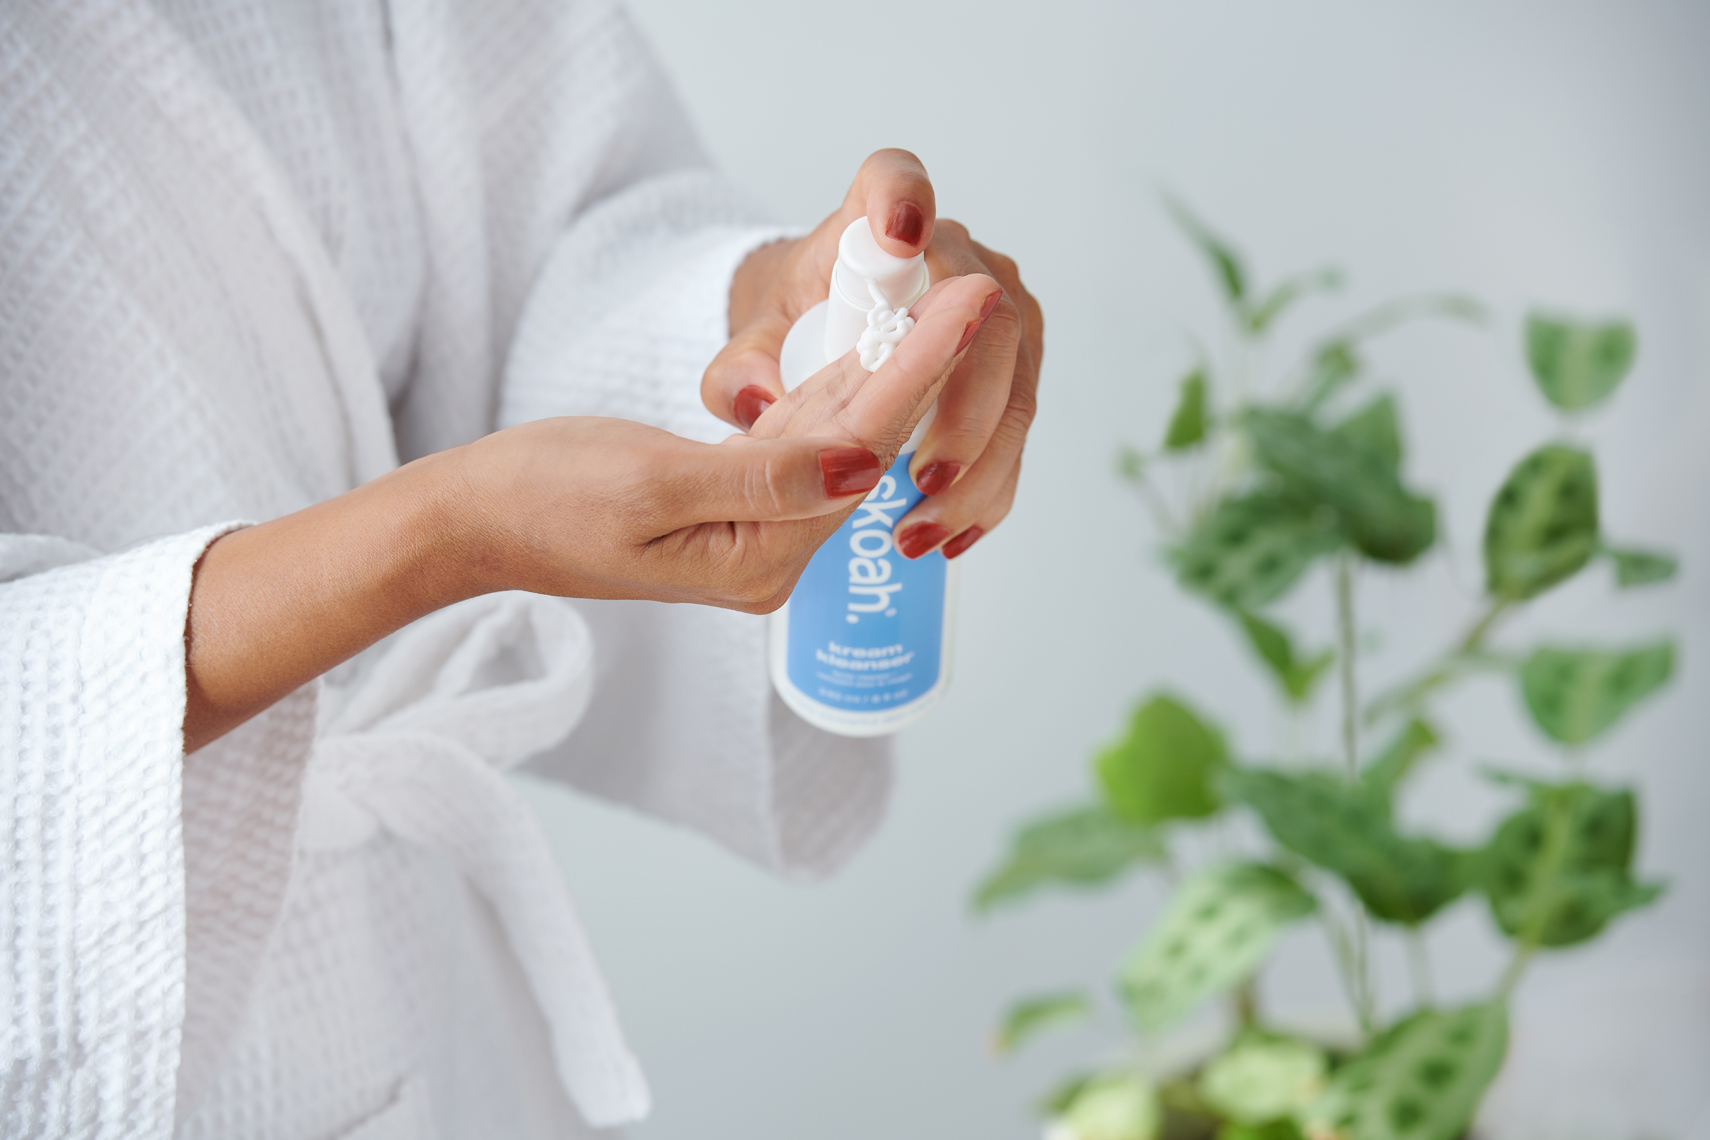 2018-Vancouver-lifestyle-Photographer-ErichSaide-Advertising-Skoah.-Product-cleanser-hands